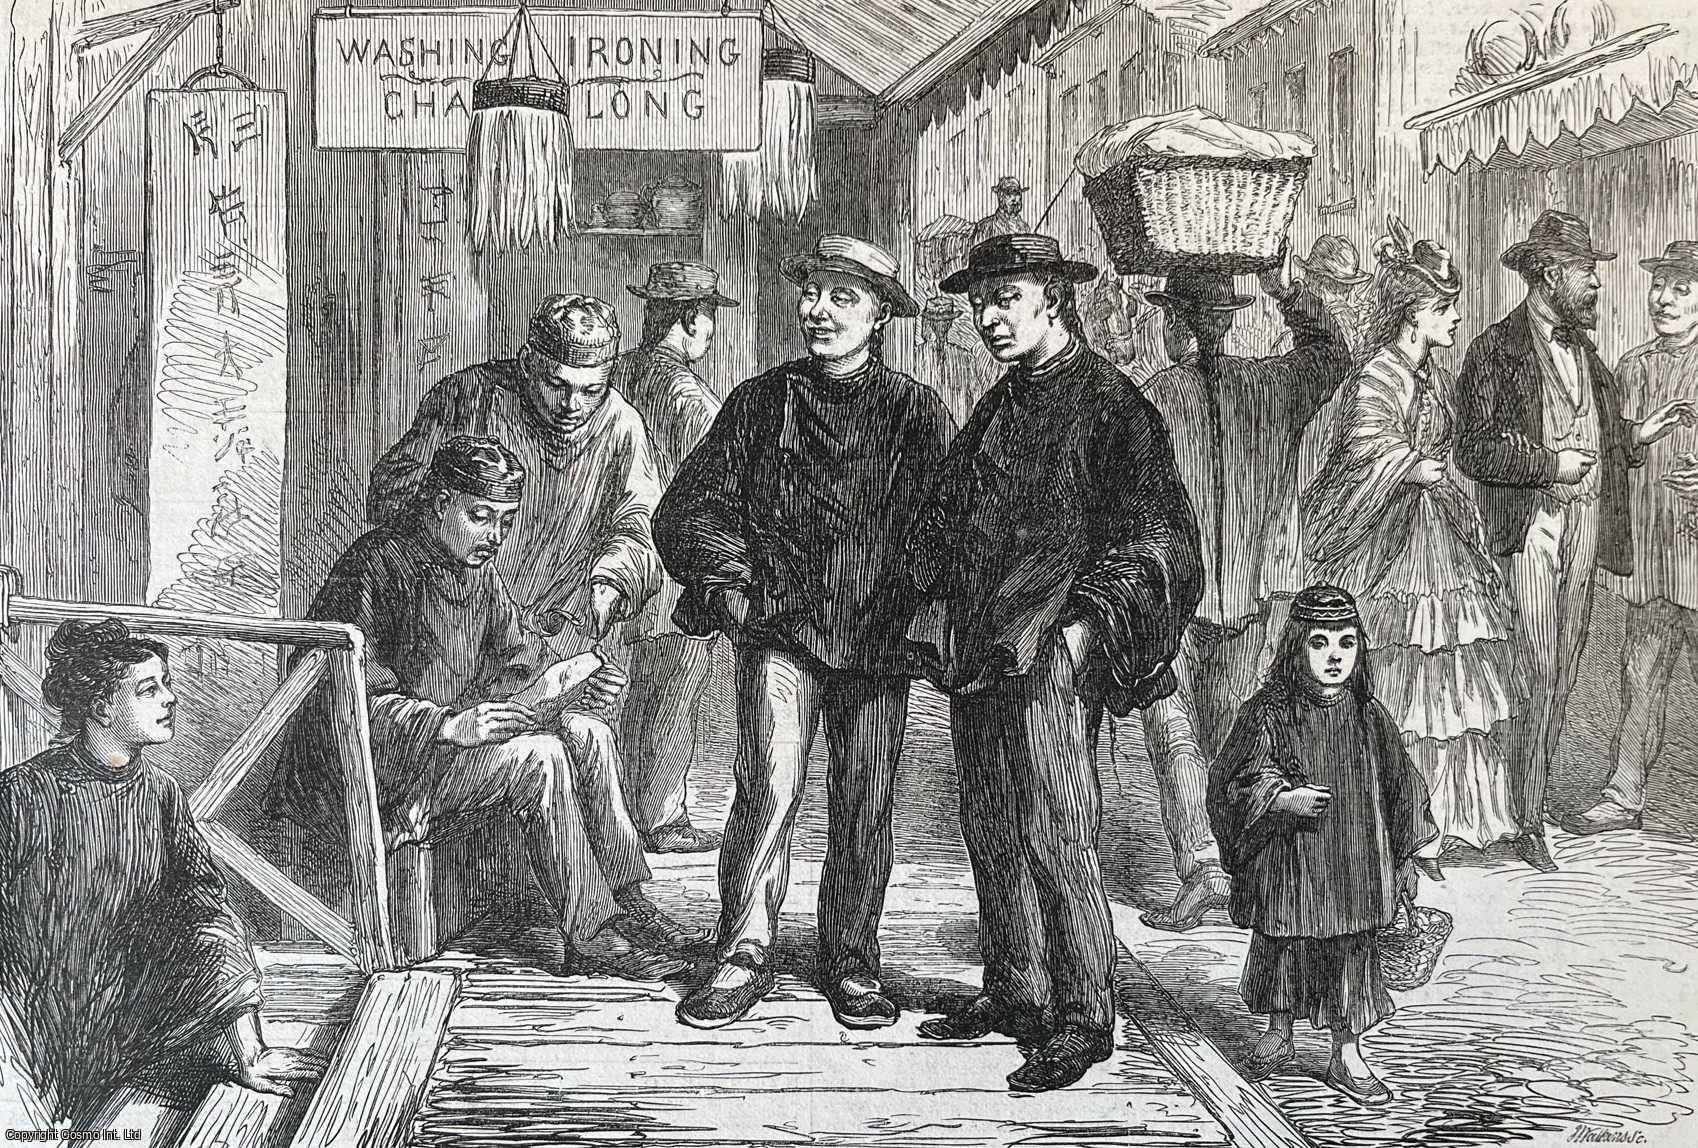 IMMIGRATION USA - The Chinese in San Francisco. An original print from the Illustrated London News, 1875.